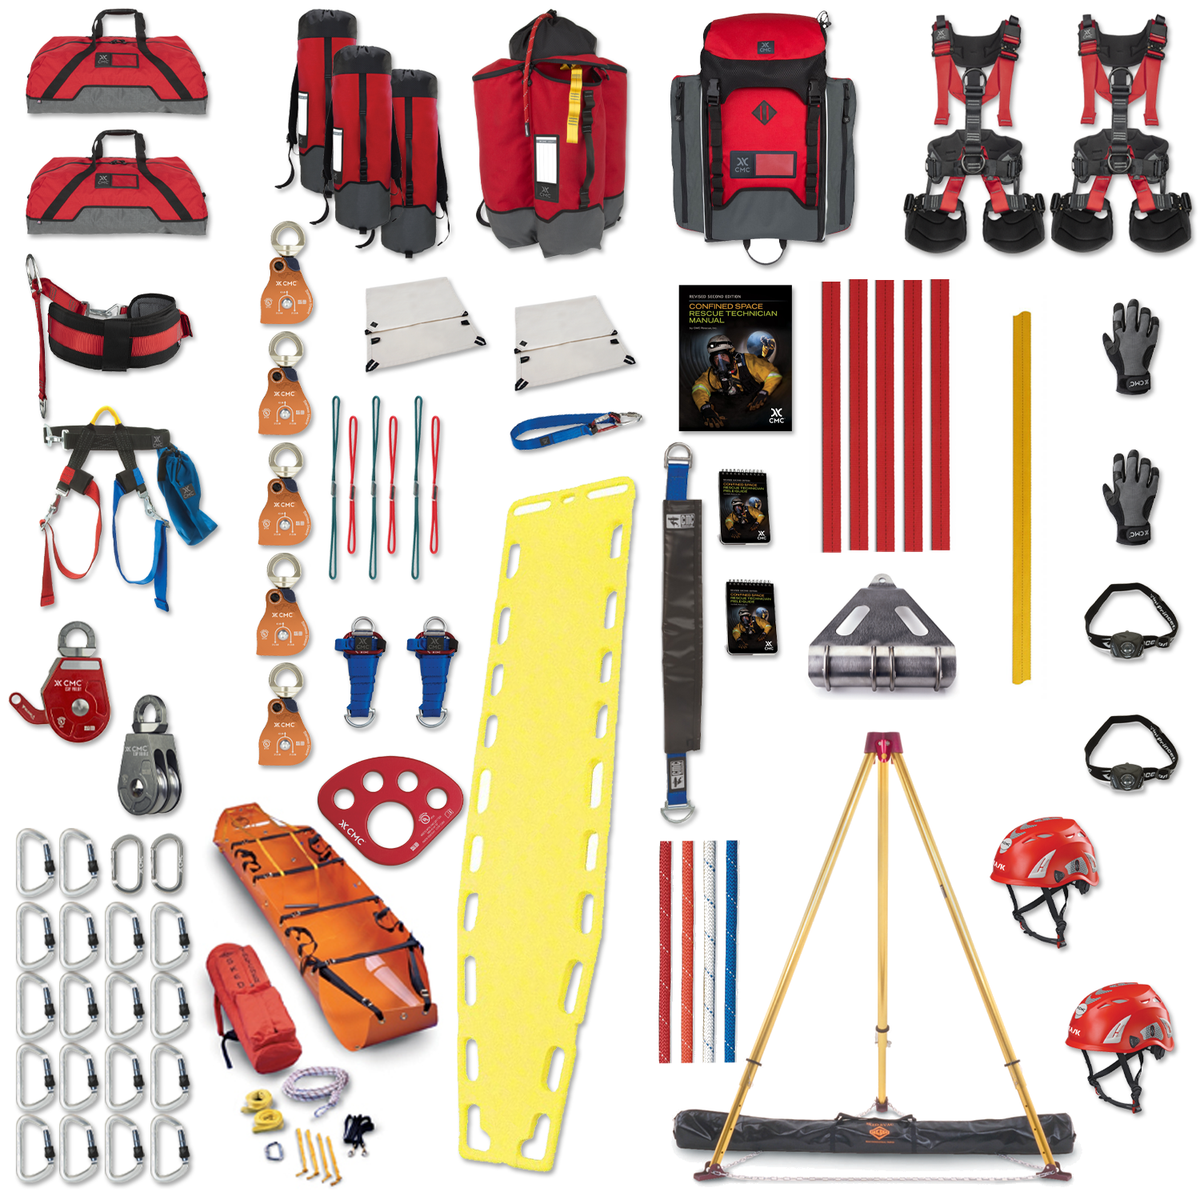 2 Man Confined Space Rescue Kit – Safe Rescue